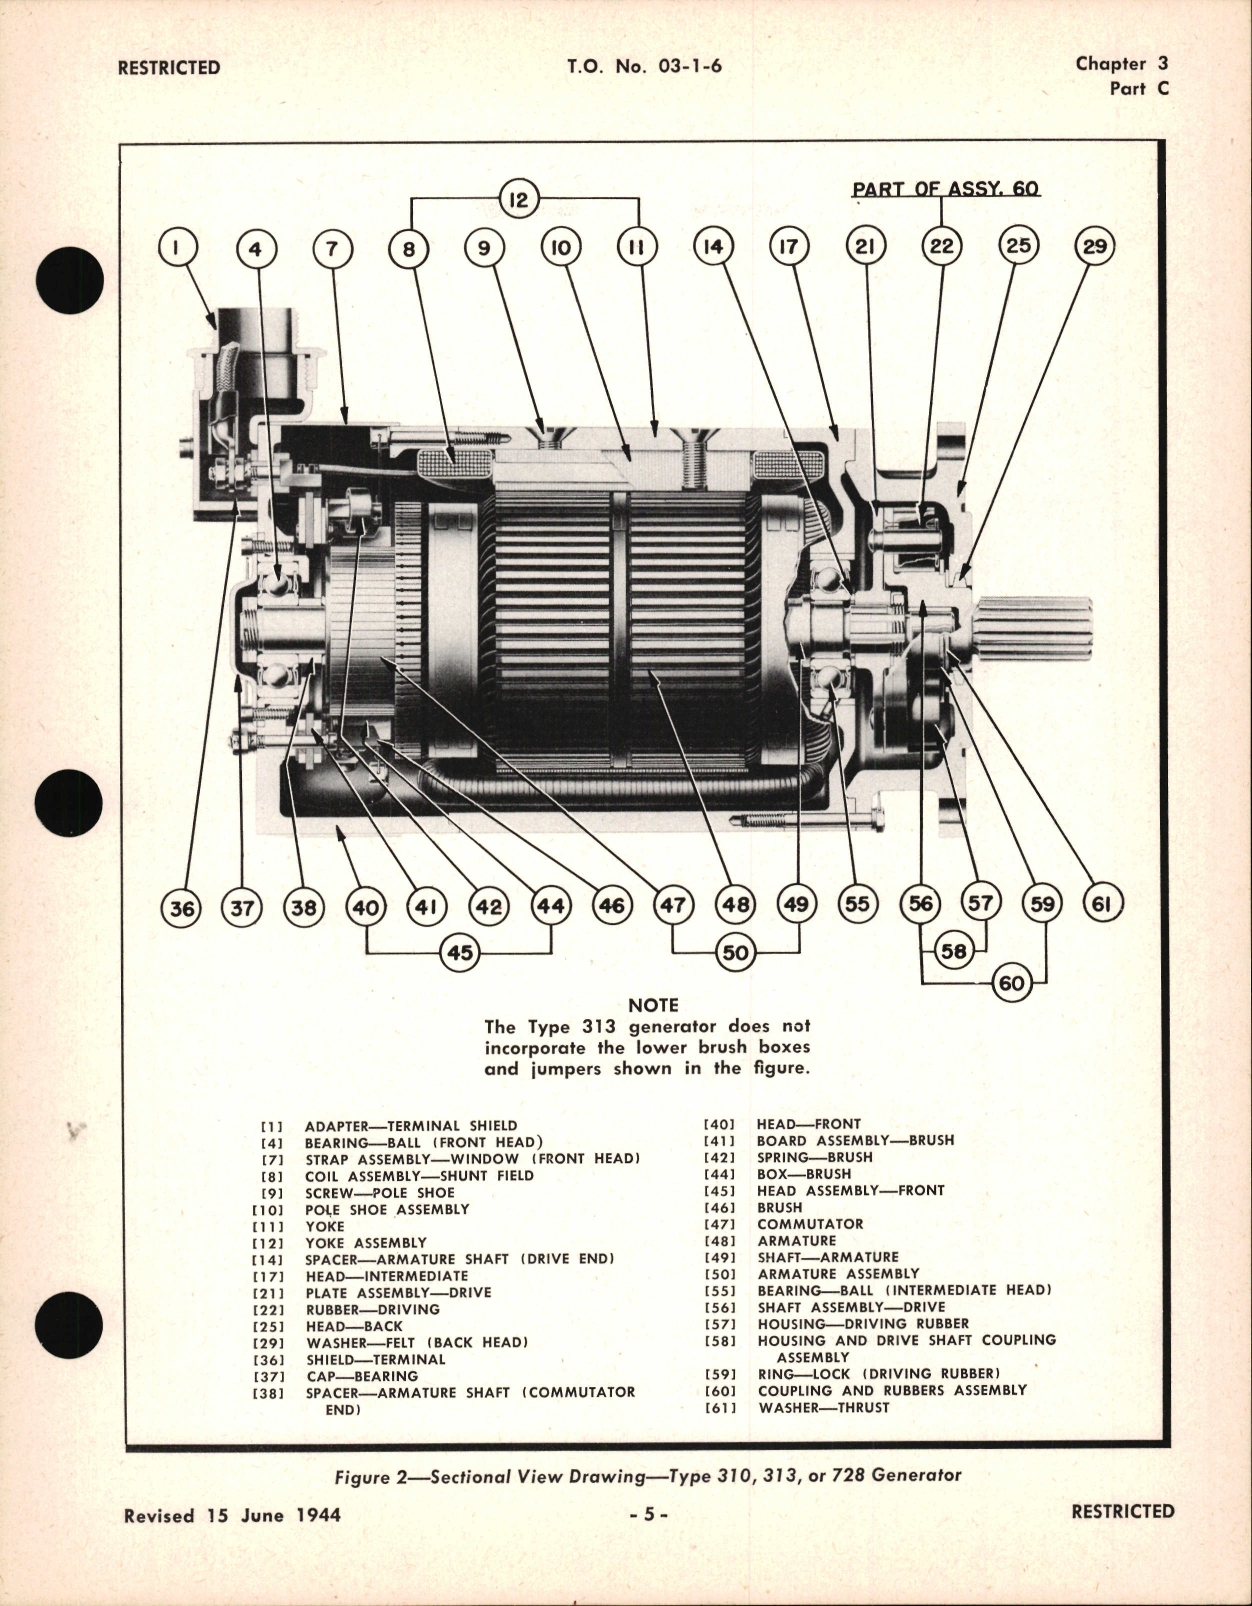 Sample page 5 from AirCorps Library document: Overhaul Instructions for Engine Driven Single Voltage D-C Generators